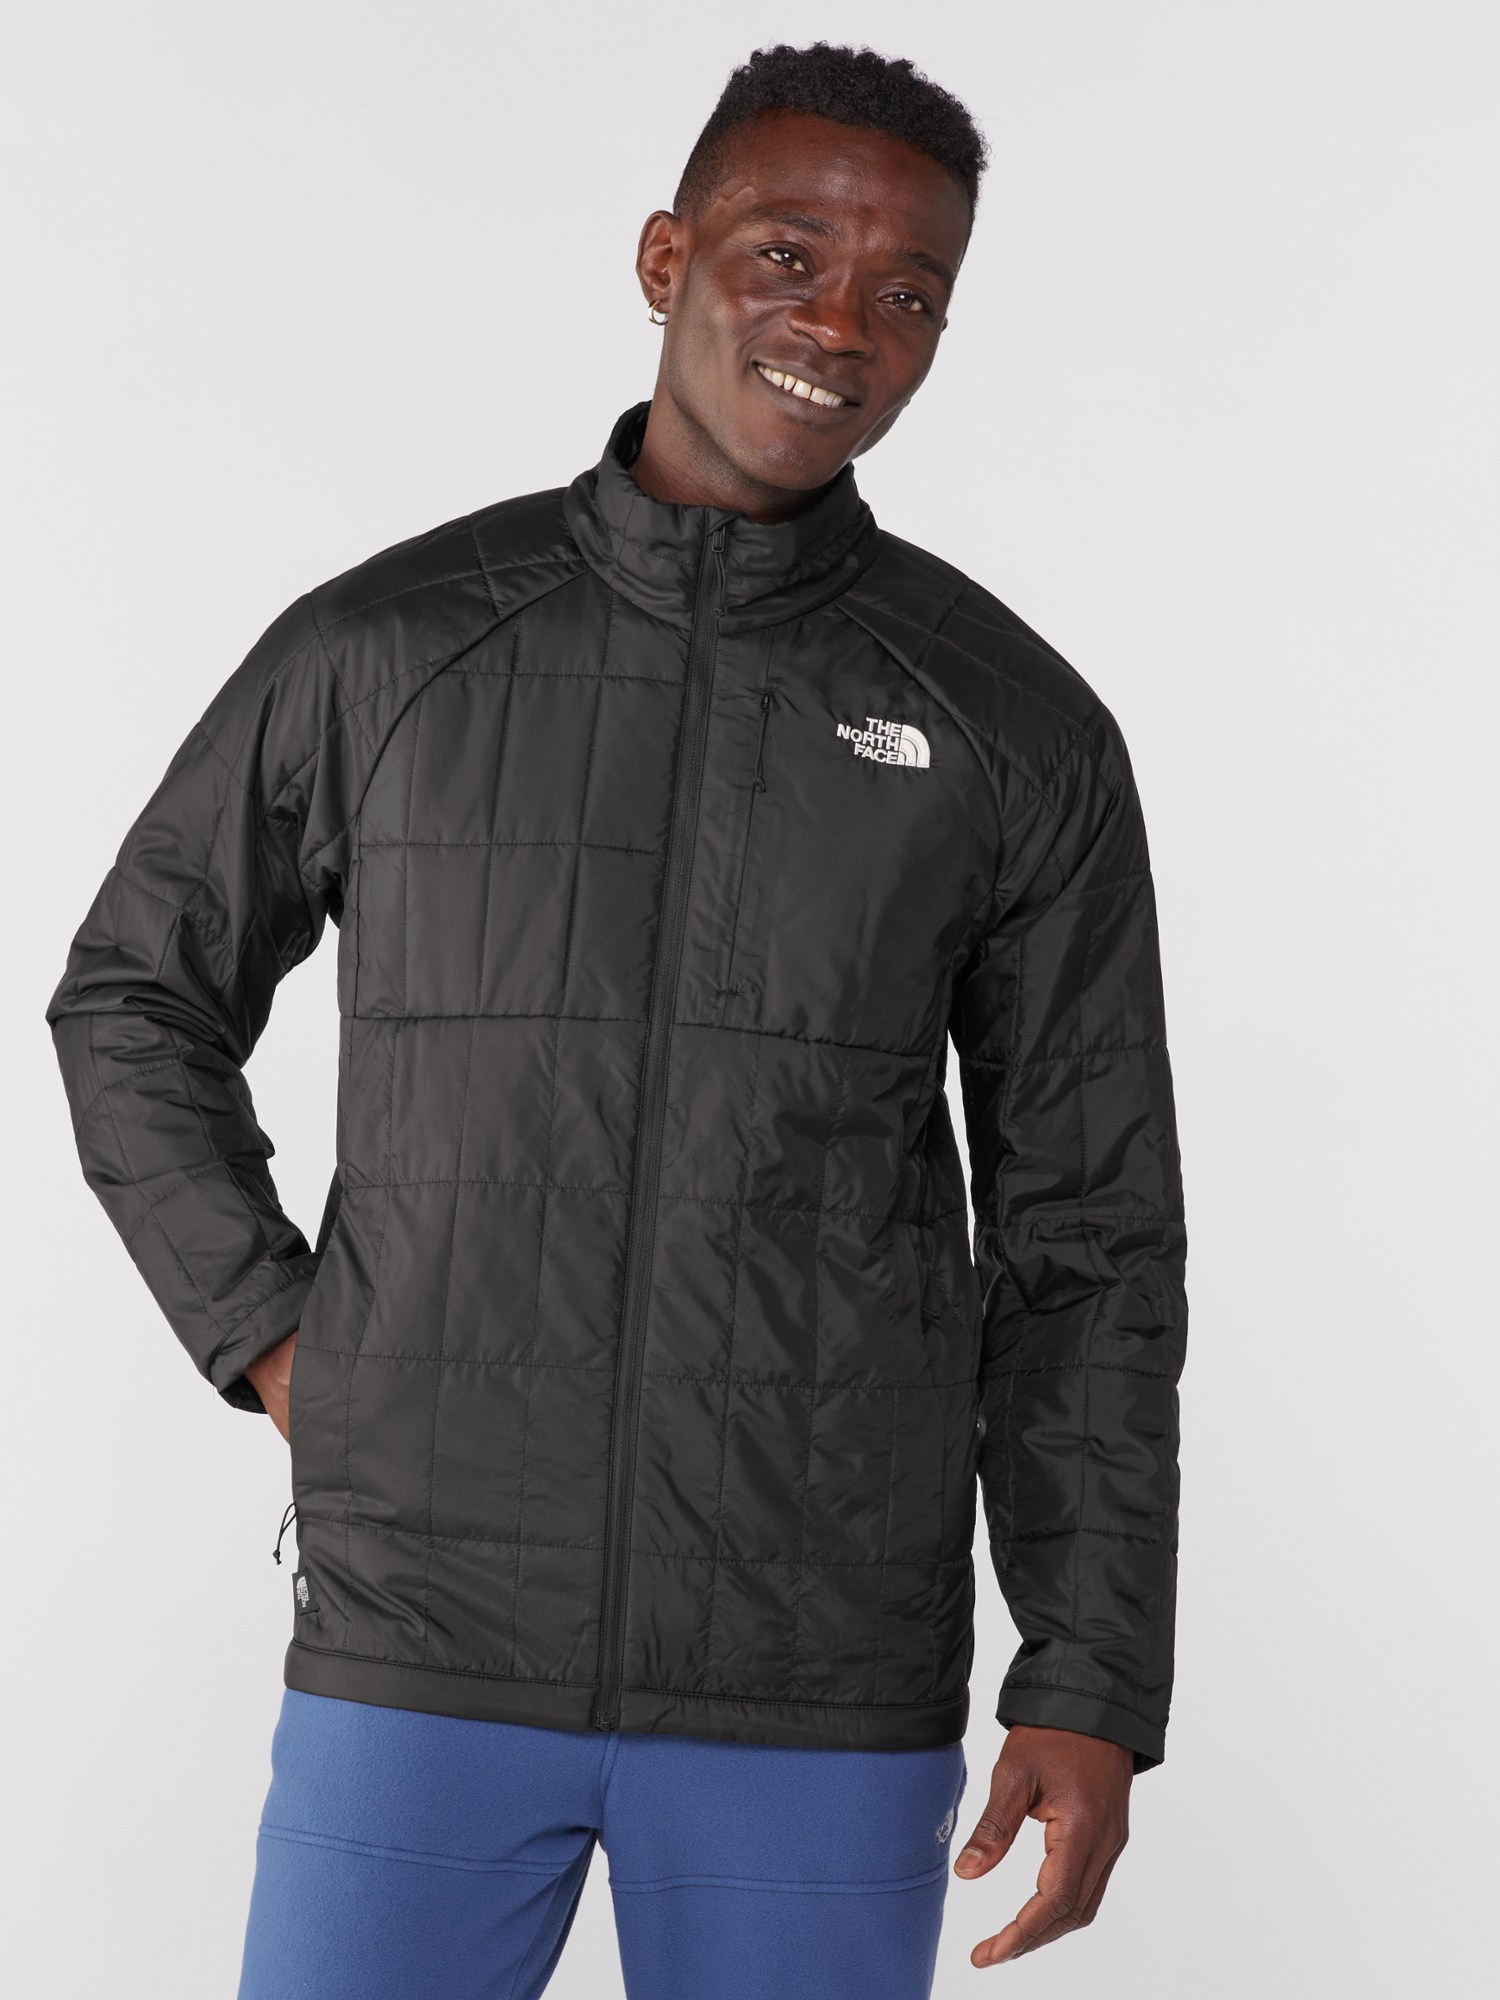 Used The North Face Circaloft Insulated Jacket | REI Co-op